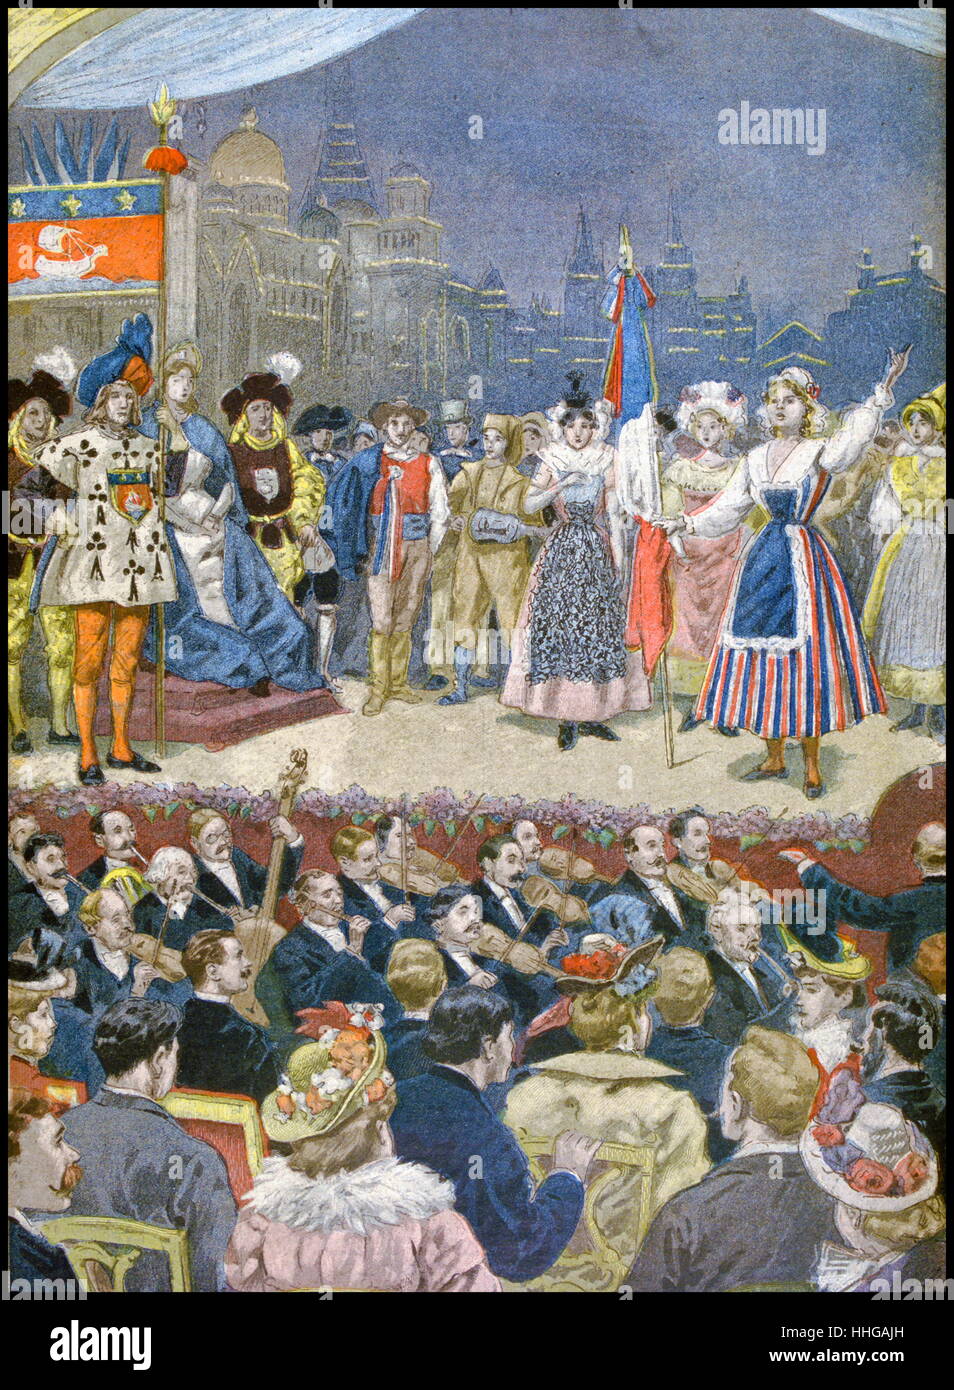 Illustration showing a theatrical performance at the Exposition Universelle of 1900. This was a fair held in Paris, France, from 14 April to 12 November 1900, to celebrate the achievements of the past century and to accelerate development into the next. Stock Photo